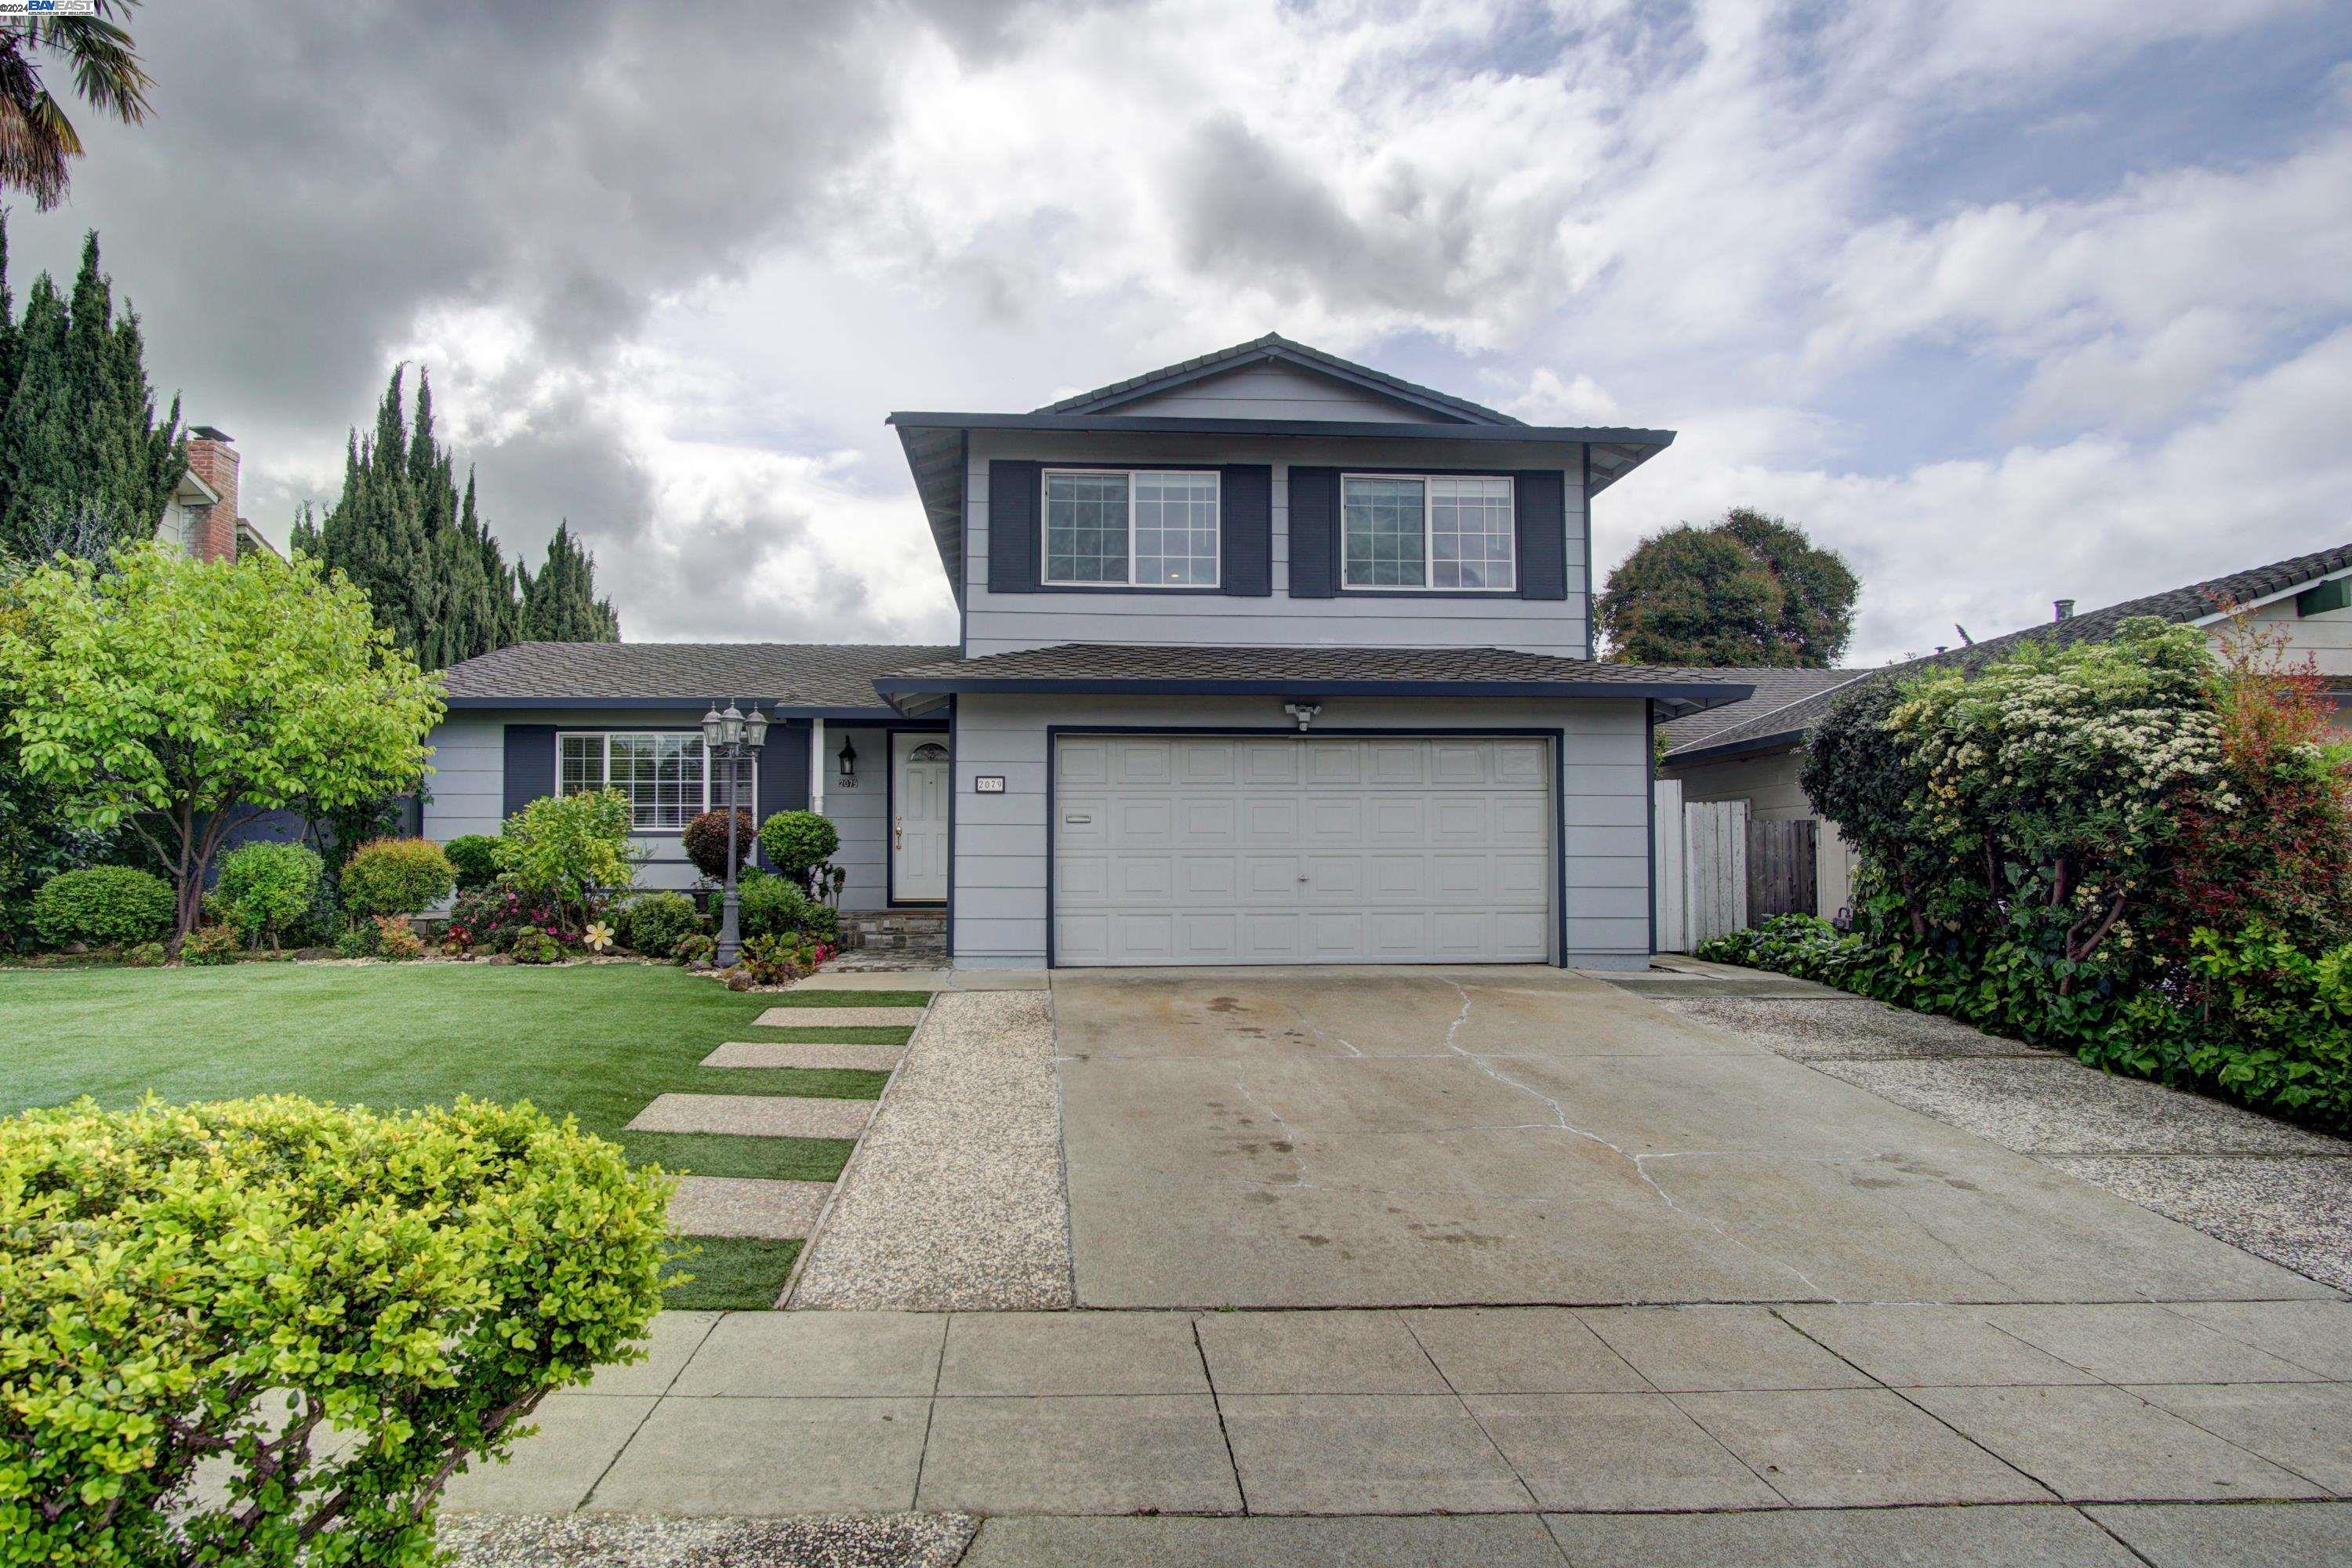 2079 Lockwood Drive, 41056455, San Jose, Detached,  for sale, Lorenzo King, REALTY EXPERTS®